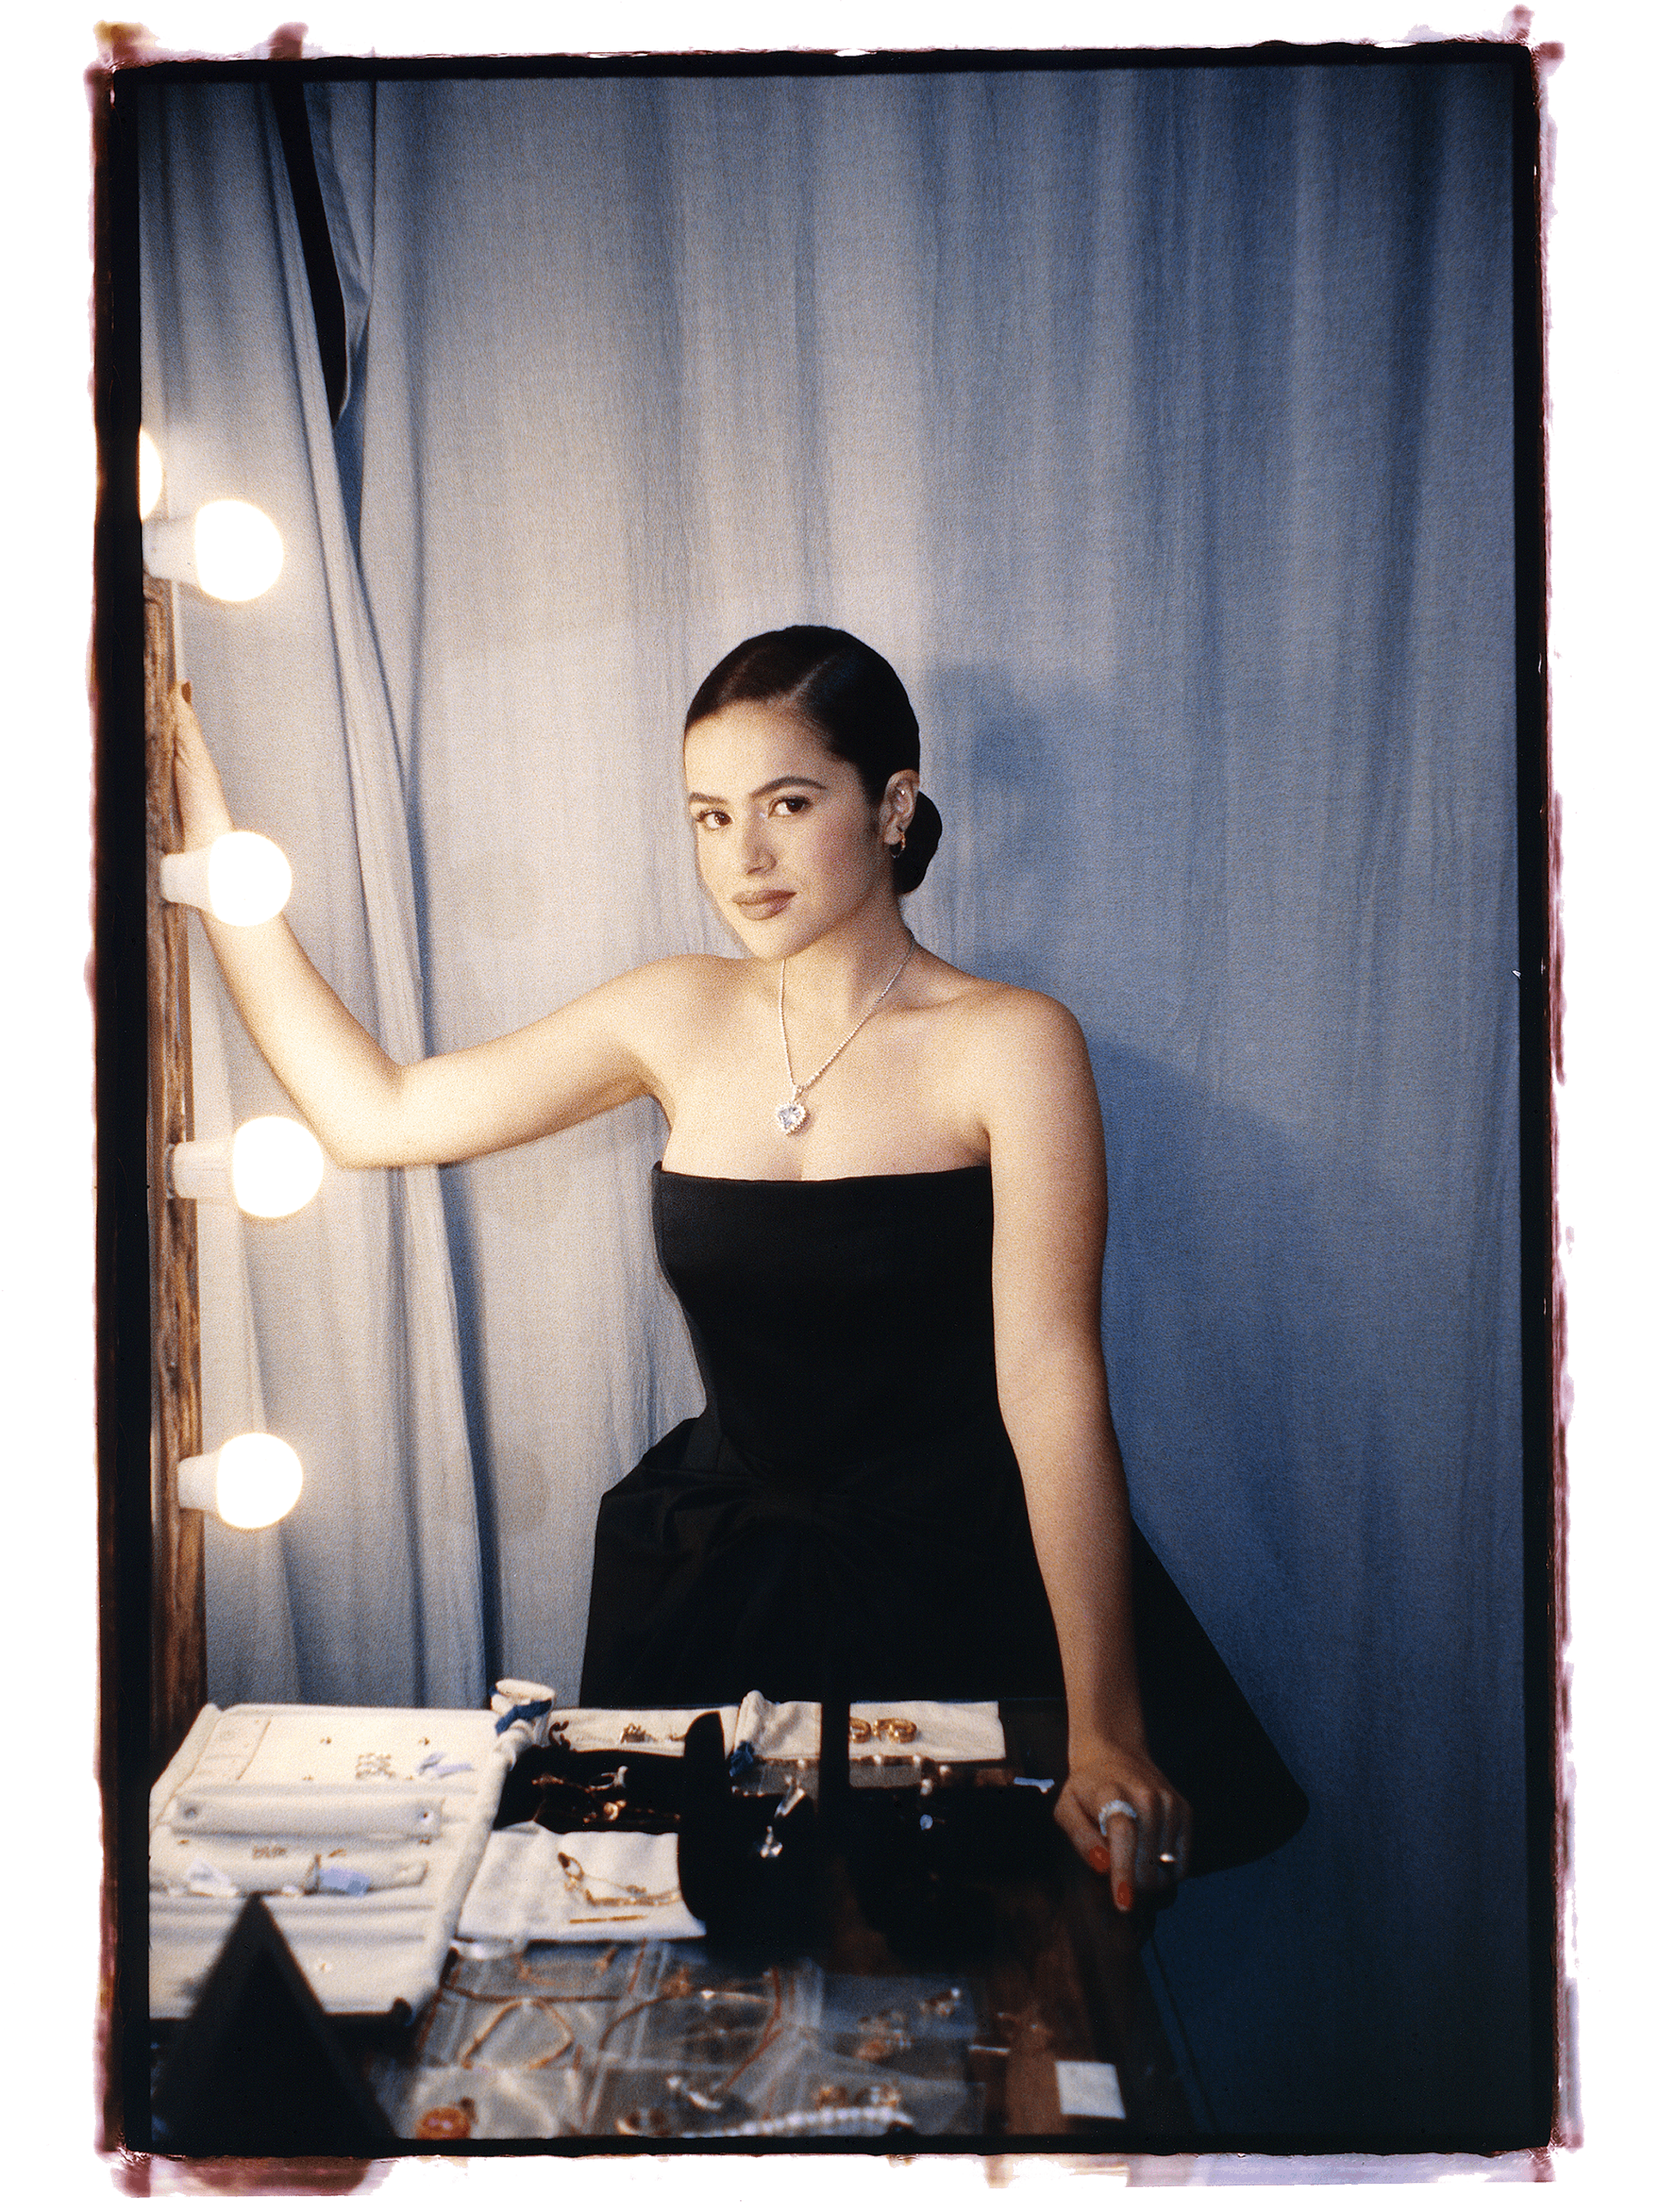 Maisa Silva wears a black strapless dress and stands by a bulb-lit mirror. She stands against a blue curtain.